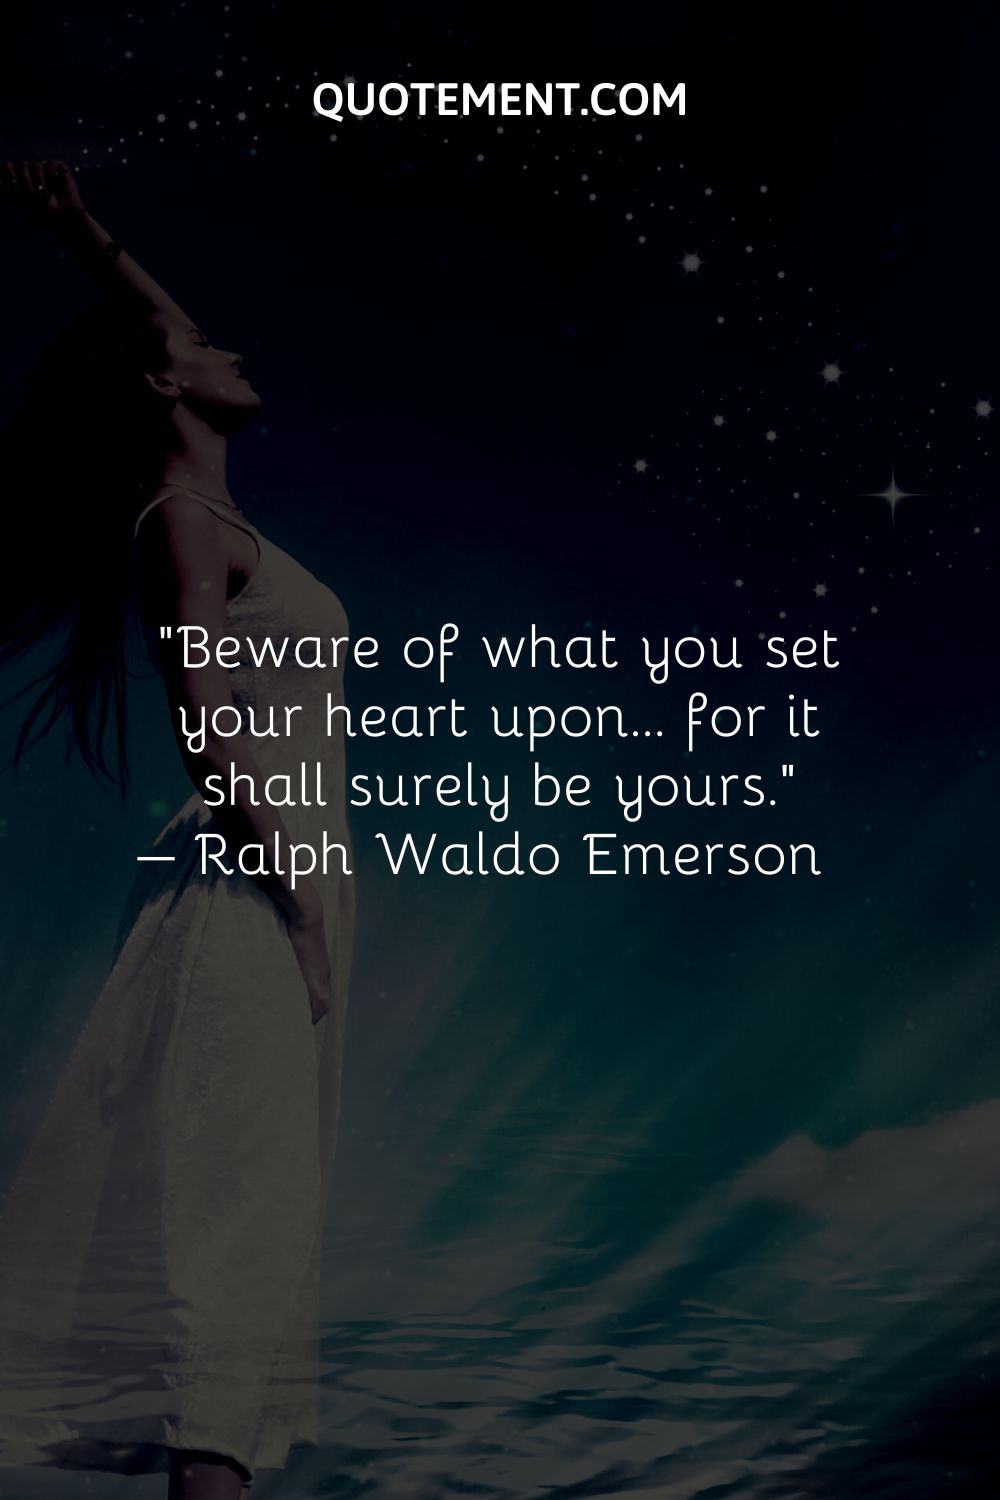 Beware of what you set your heart upon… for it shall surely be yours